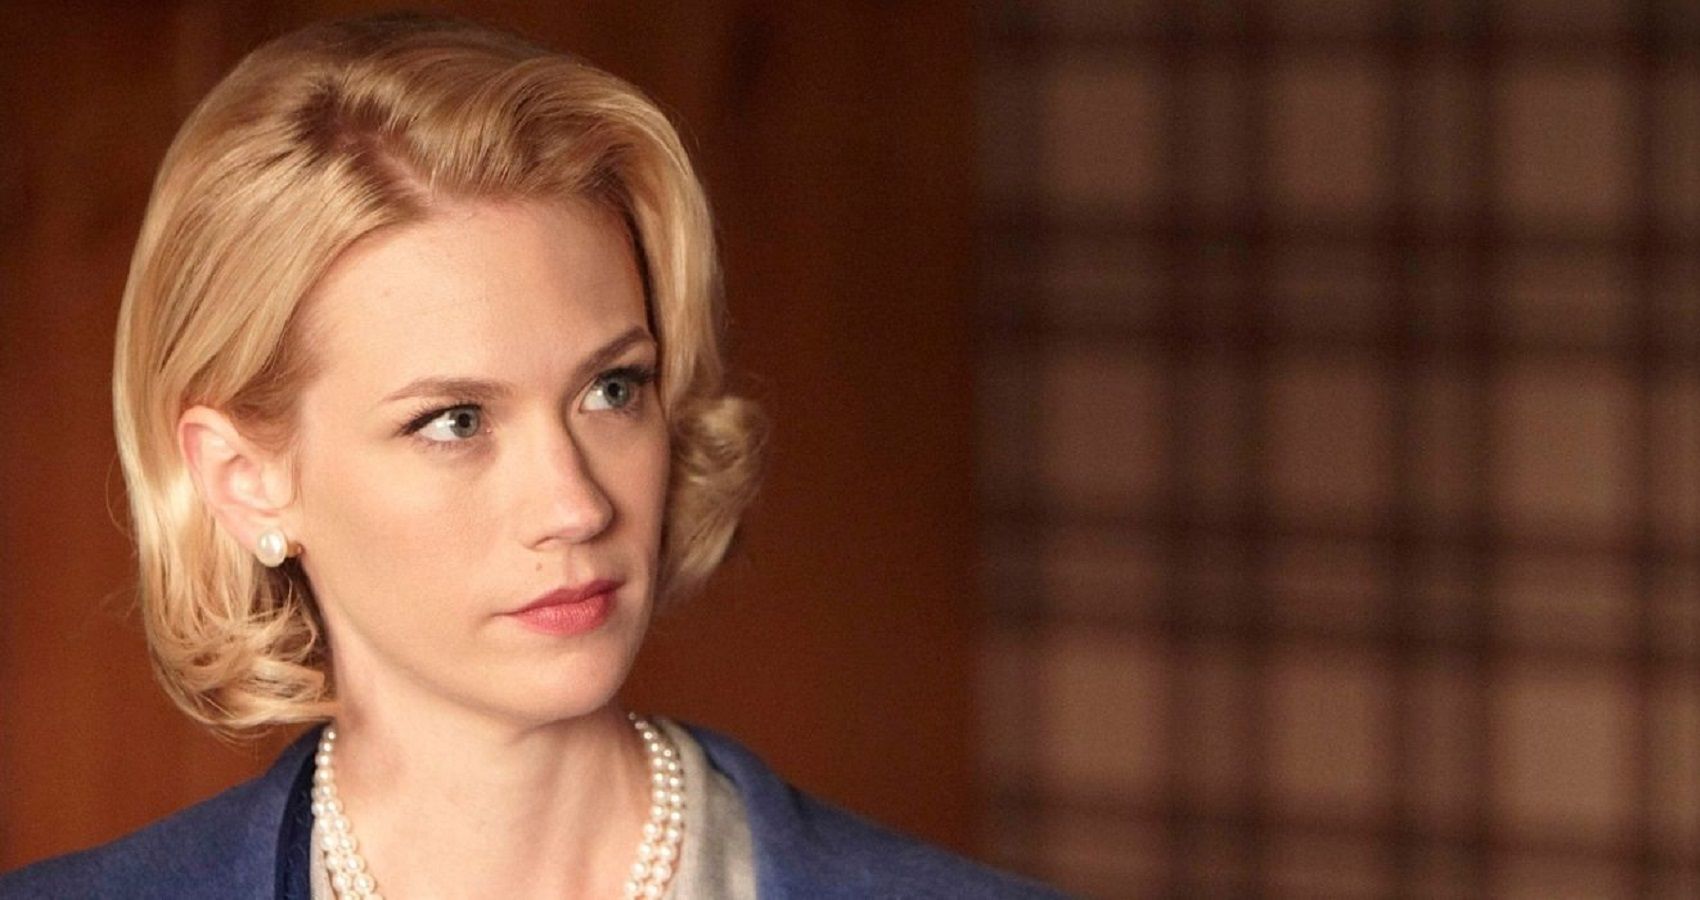 What January Jones Has Been Up To Since The End Of Mad Men